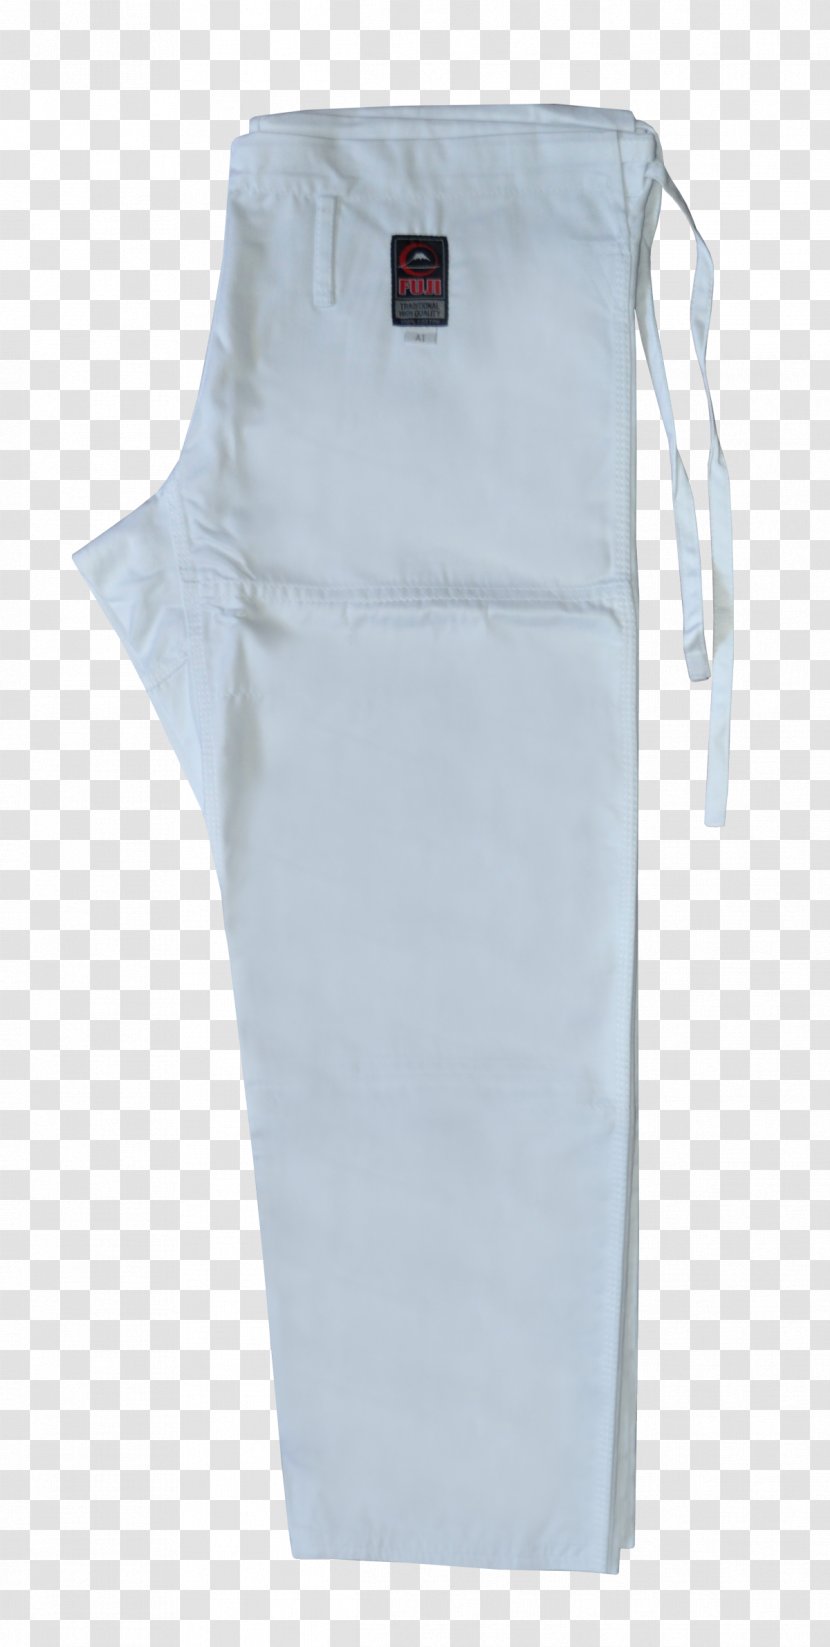 Sleeve - White - Folded Jeans Transparent PNG